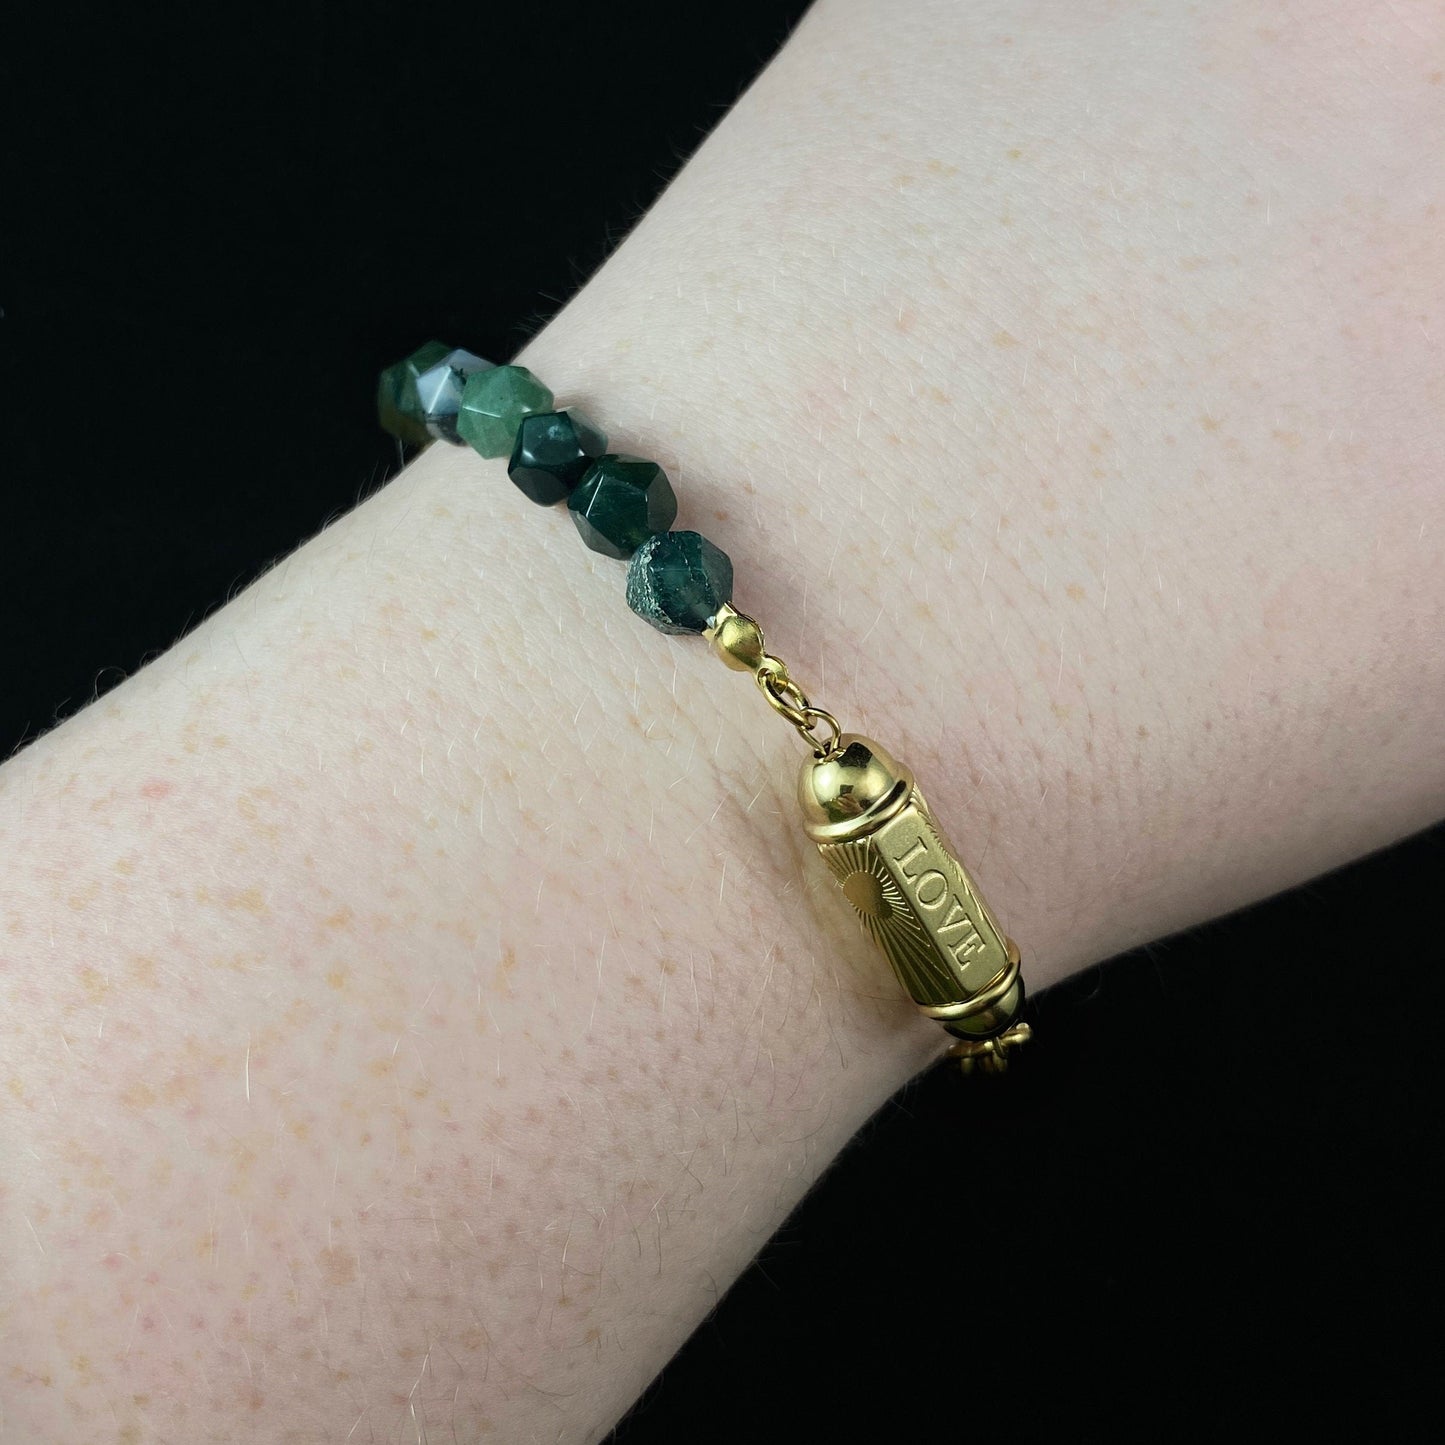 Green Natural Stone Bracelet with Love Calligraphy and Dainty Gold Heart Detailing